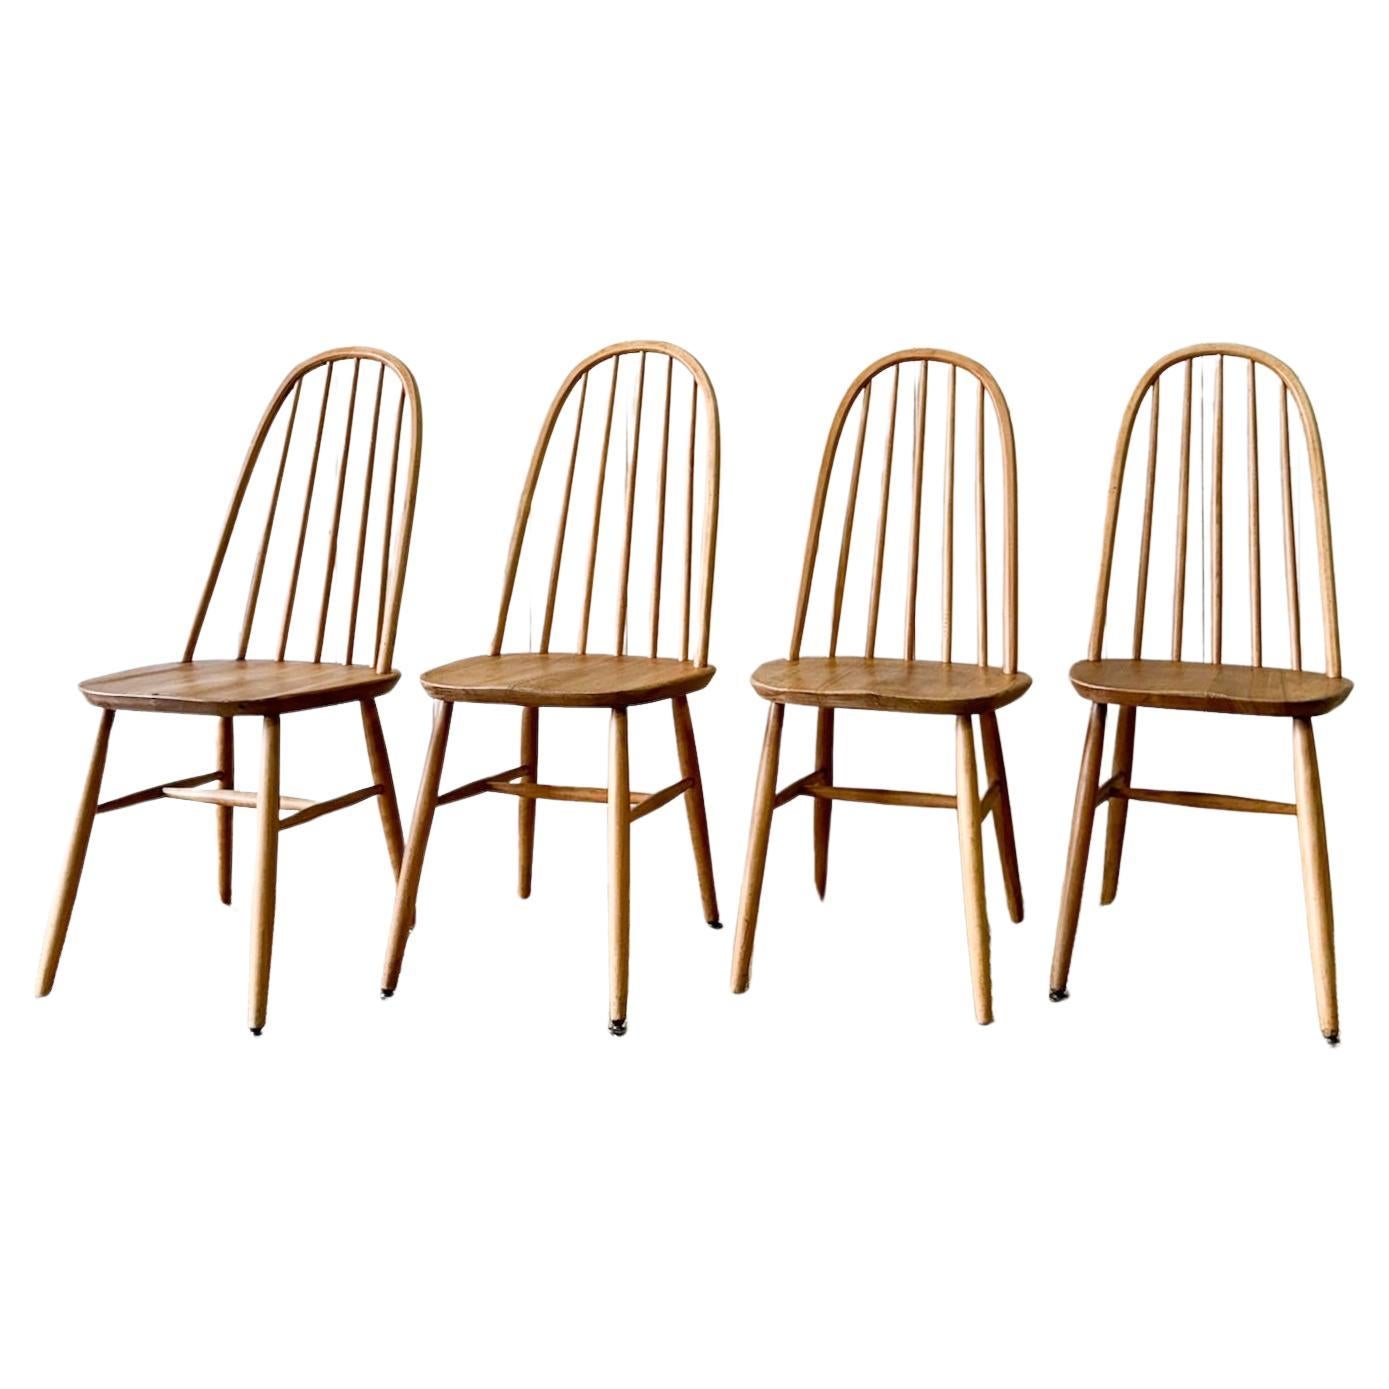 A Set of 4 Pine Ercol Chairs For Sale